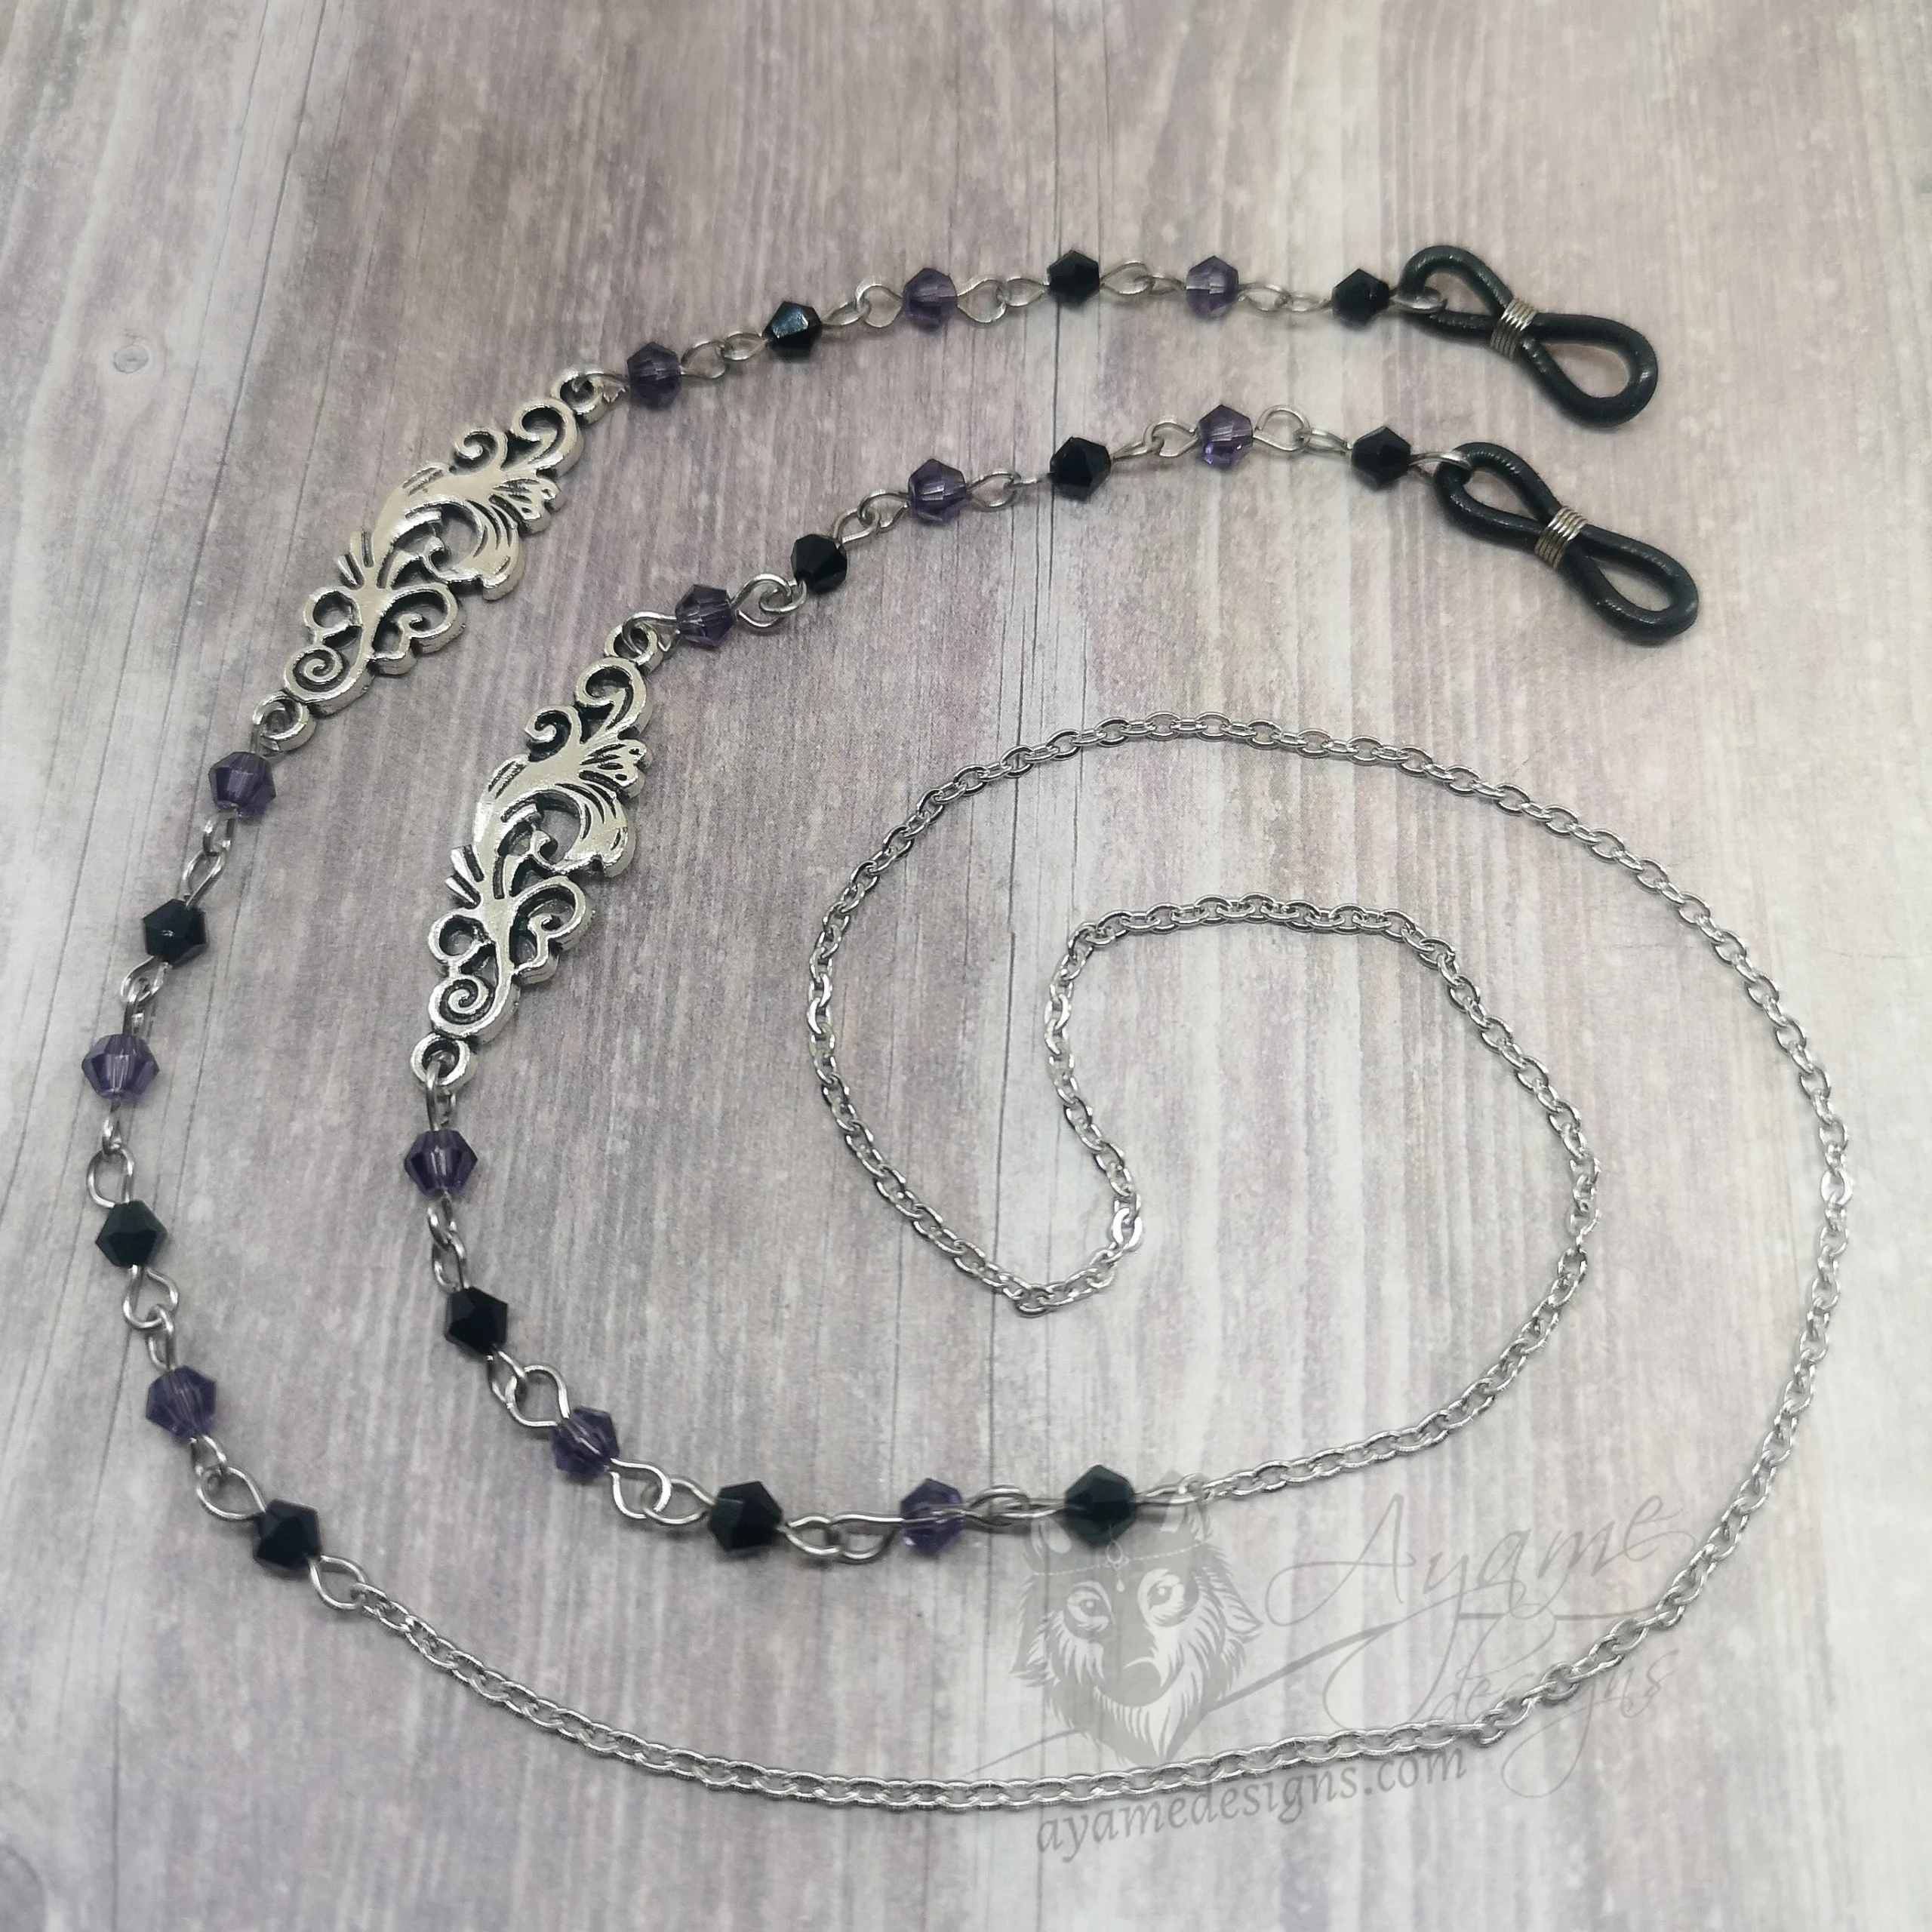 Handmade gothic glasses chain with filigree charms, purple and black Austrian crystal beads and stainless steel chain